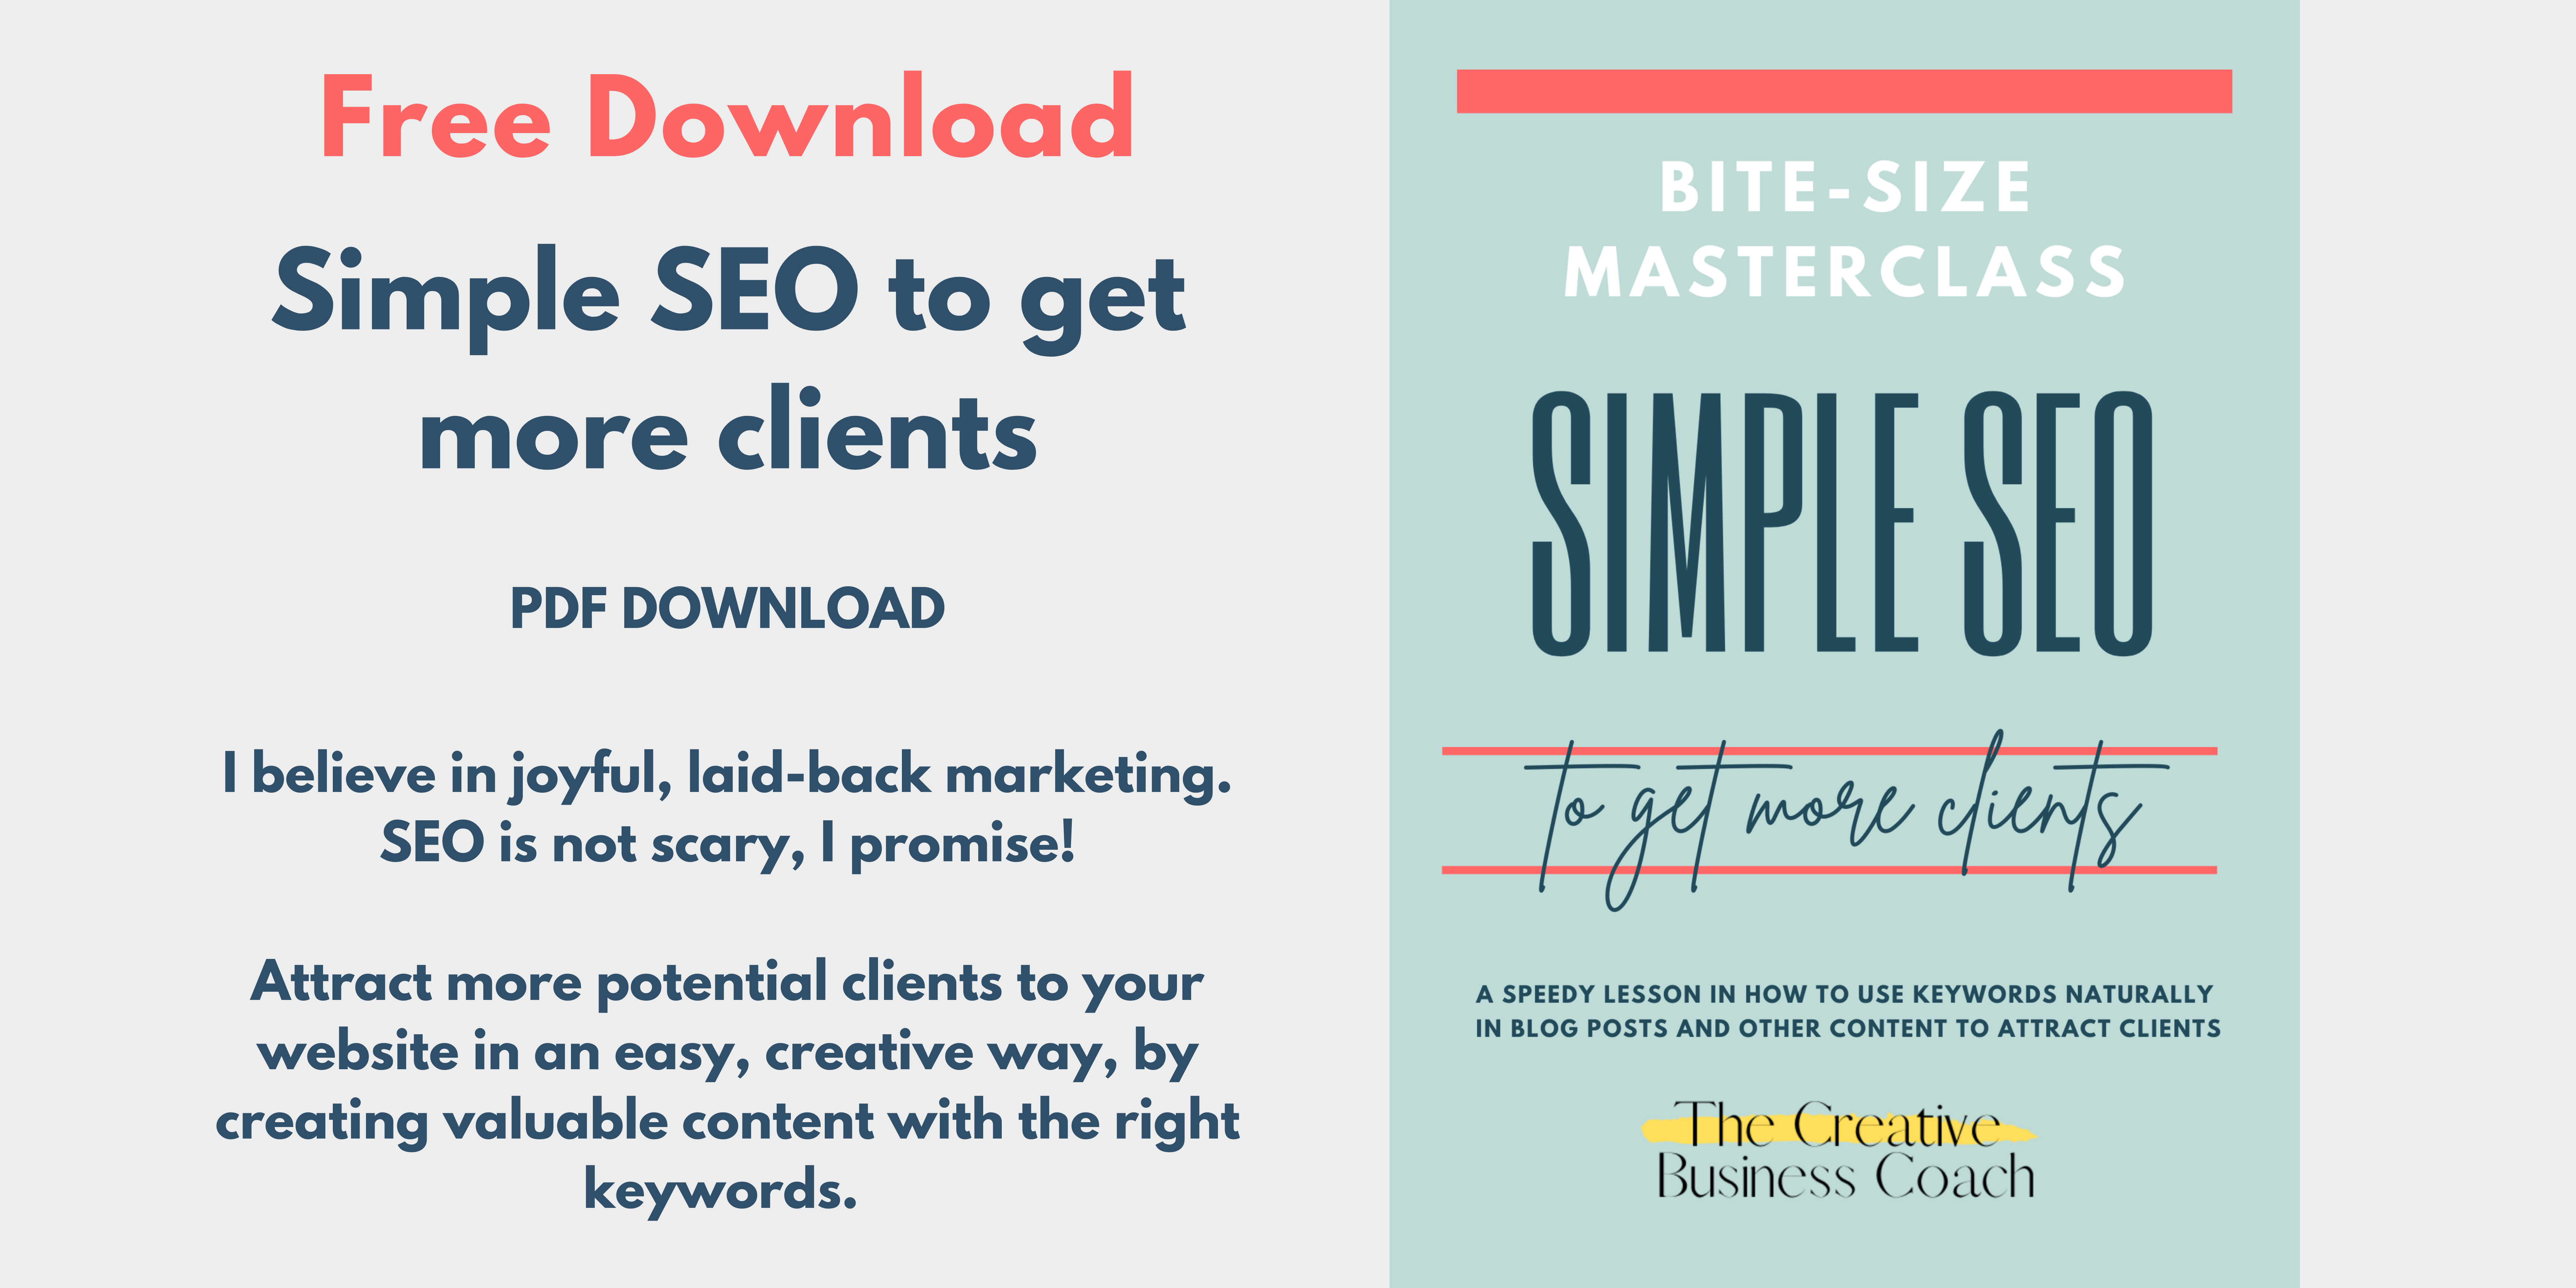 Simple SEO to get more clients